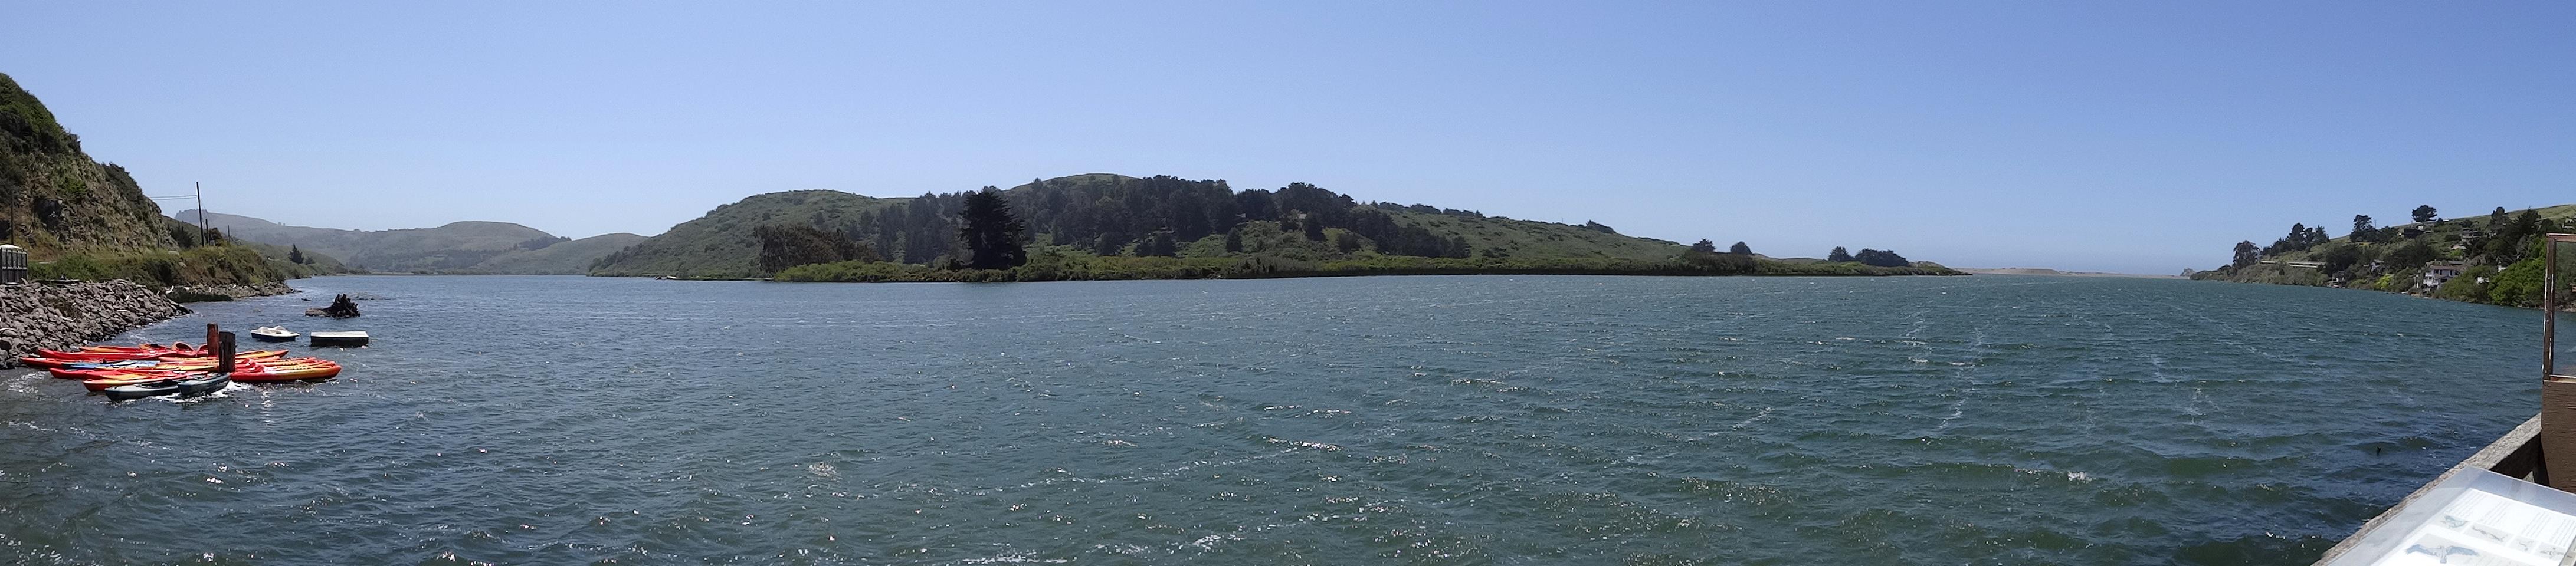 This is the river mouth from the dock by the State Park Visitor Center at Jenner. (Wide)